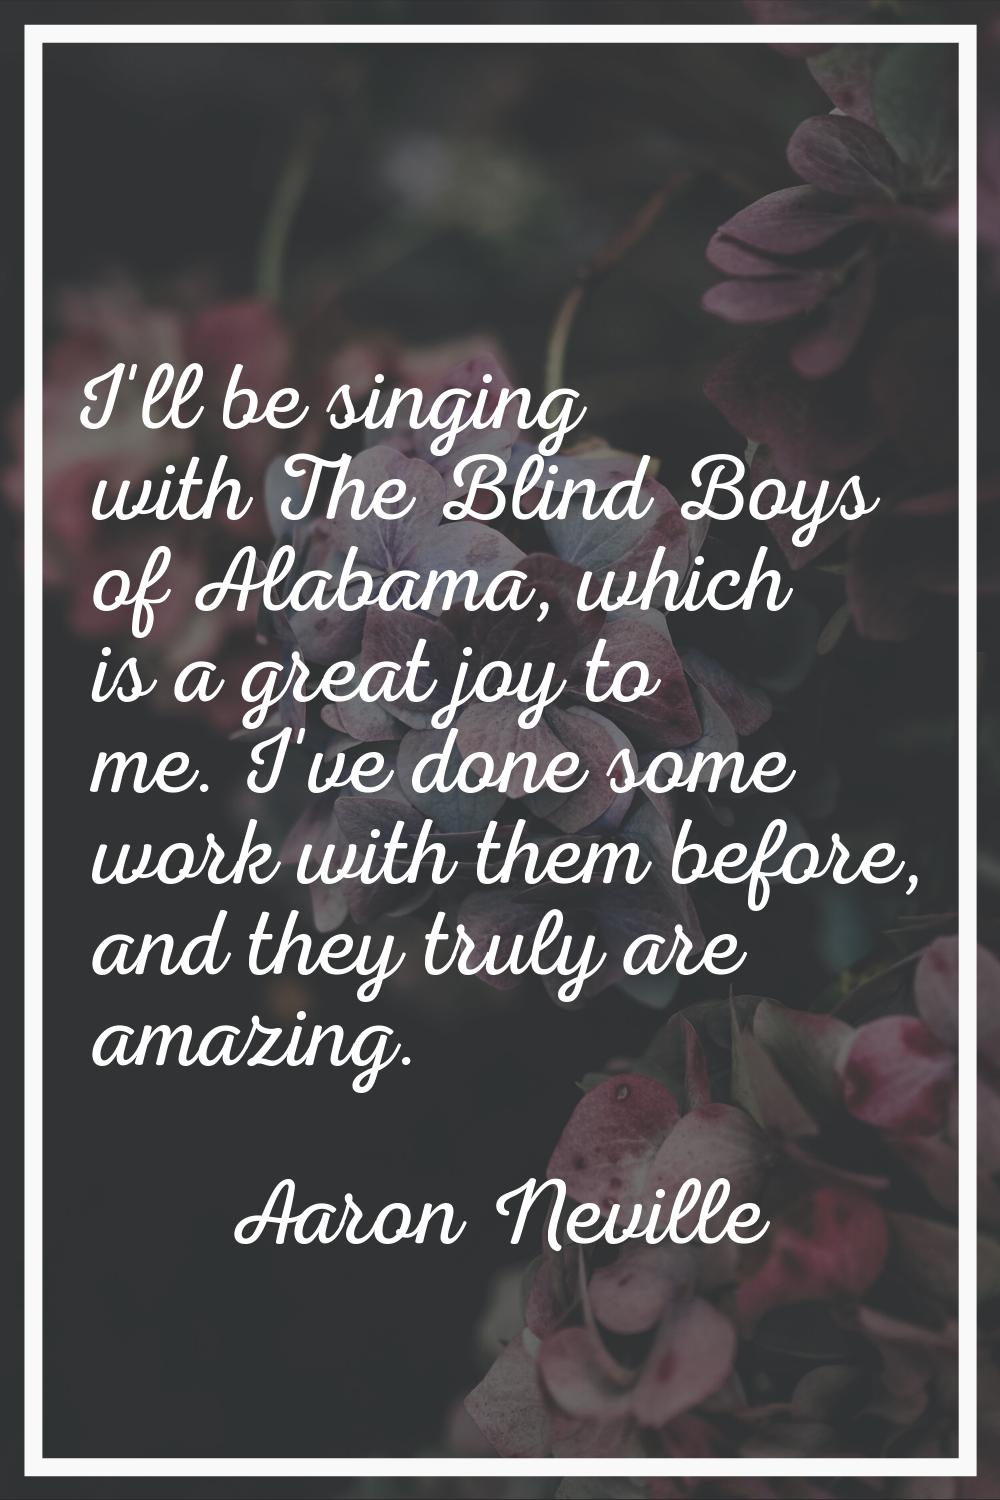 I'll be singing with The Blind Boys of Alabama, which is a great joy to me. I've done some work wit